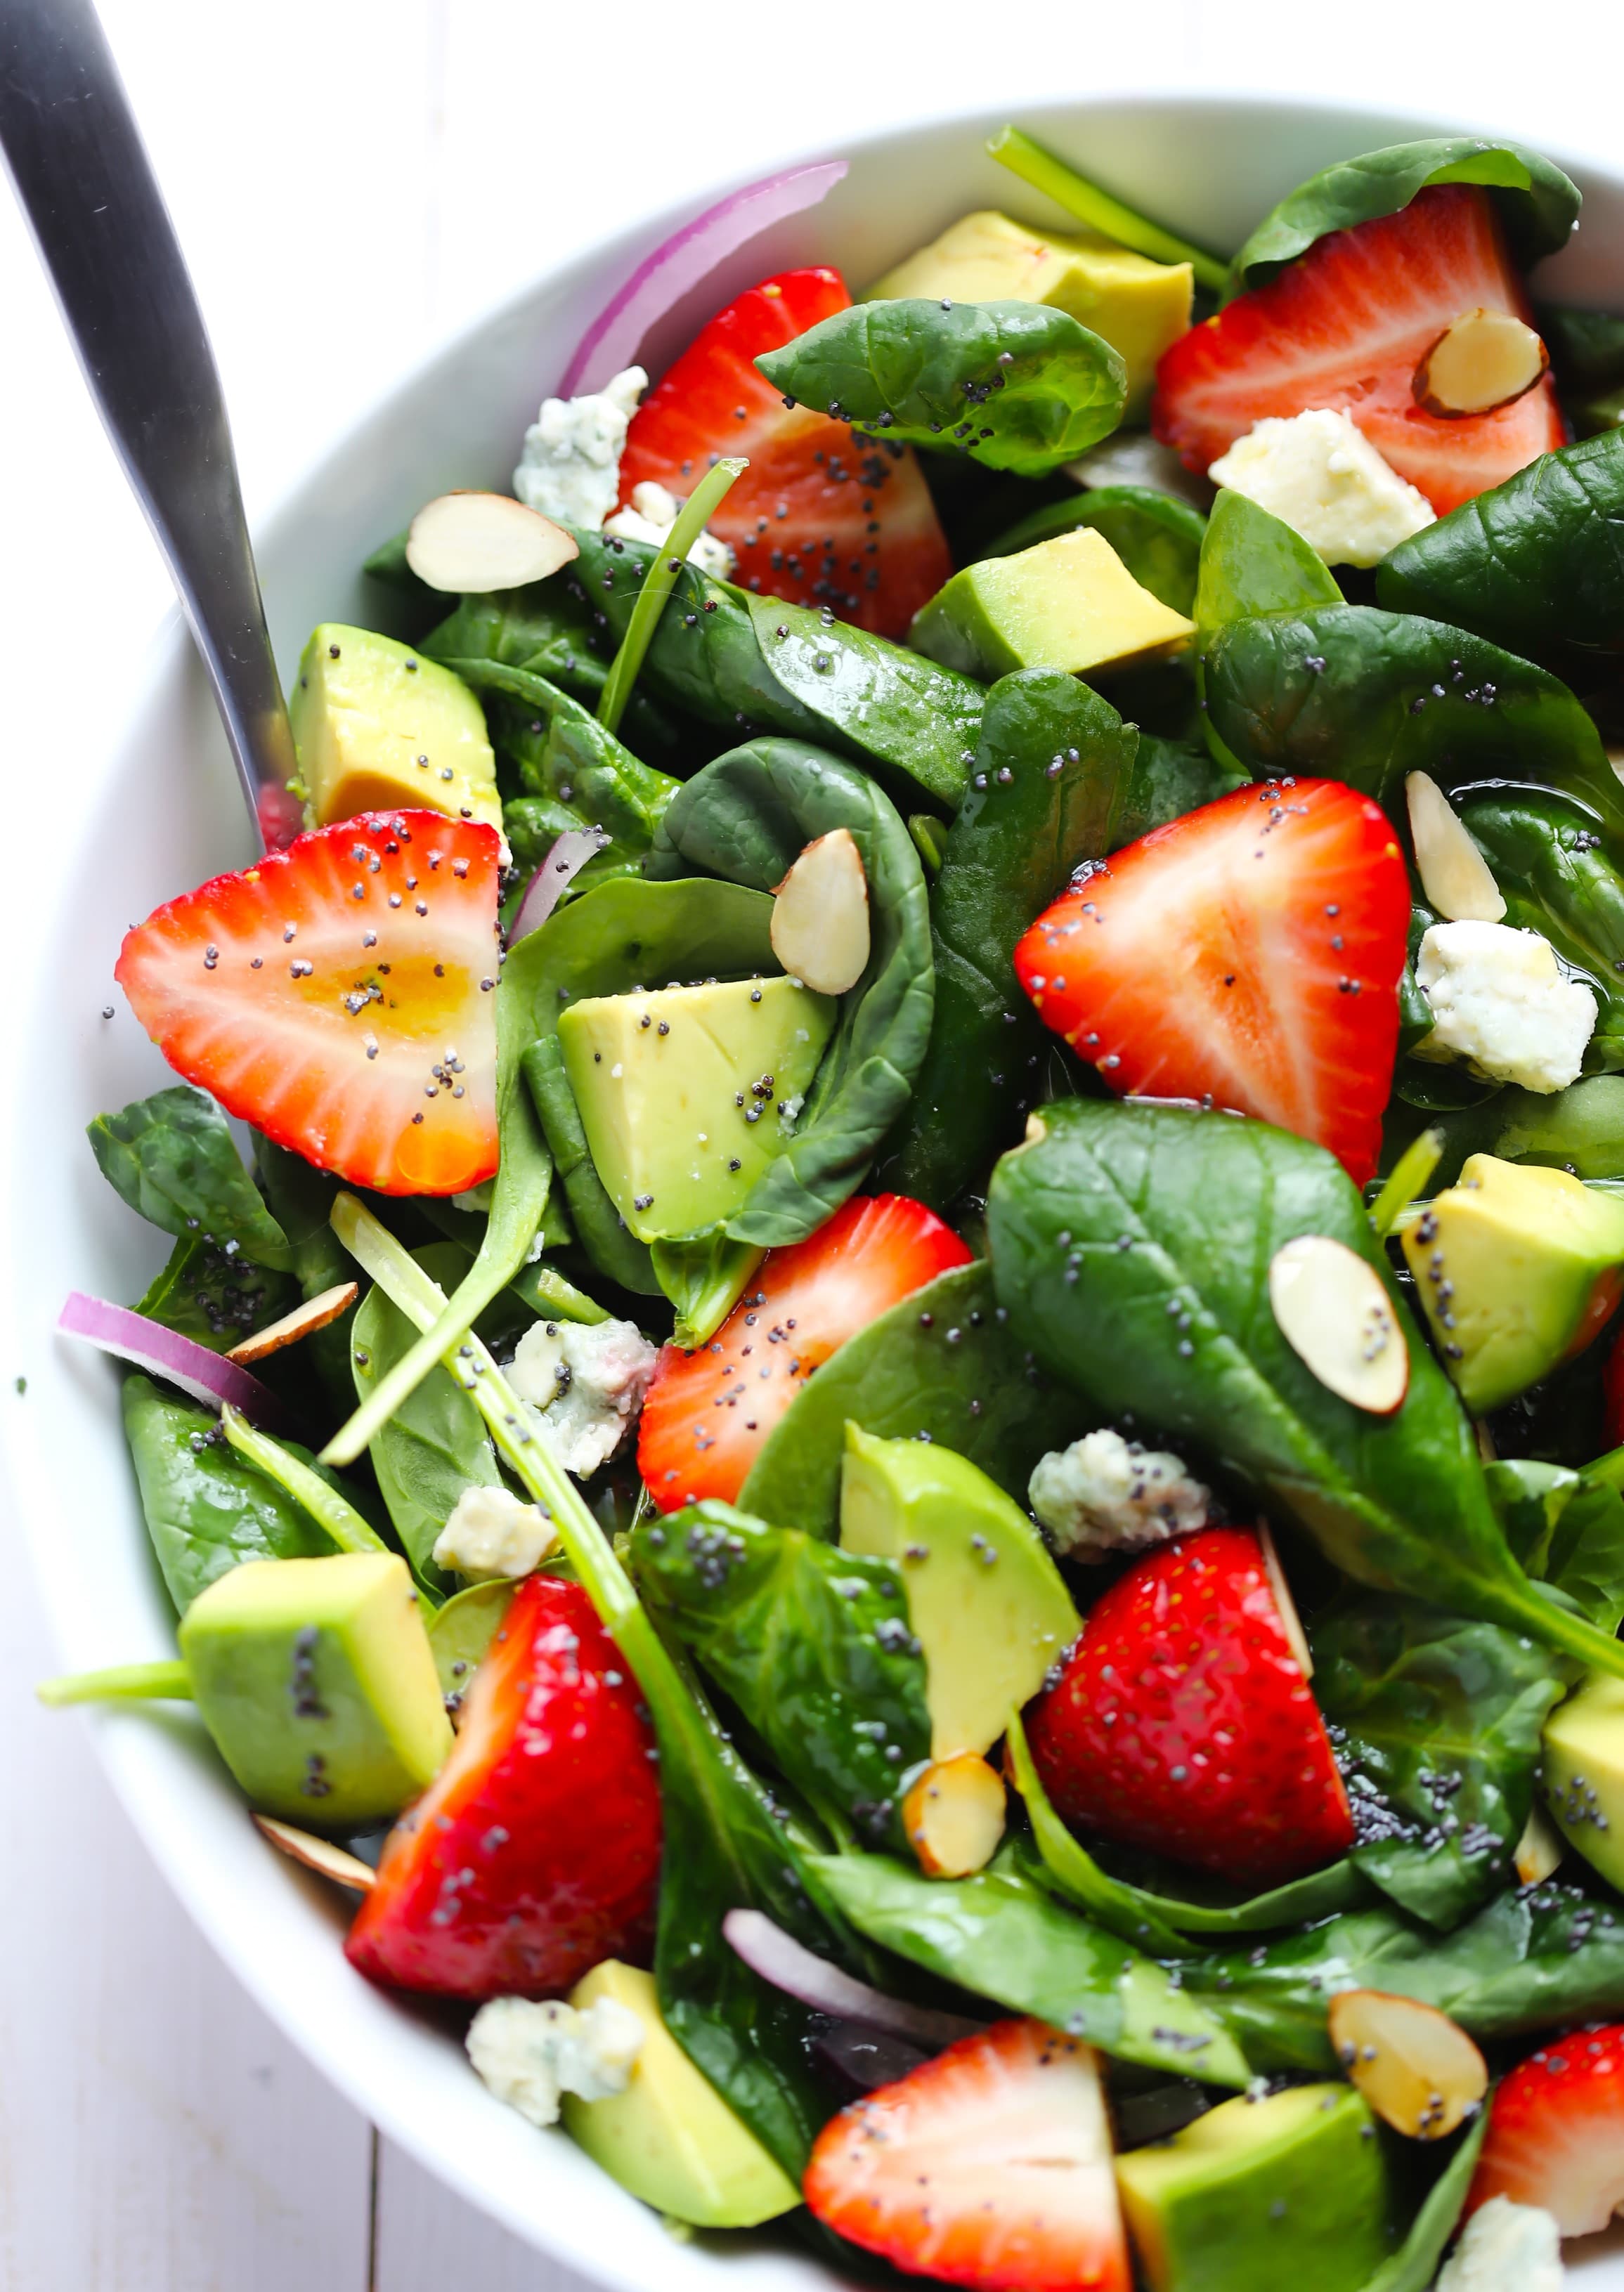 Spinach and Strawberries Salad